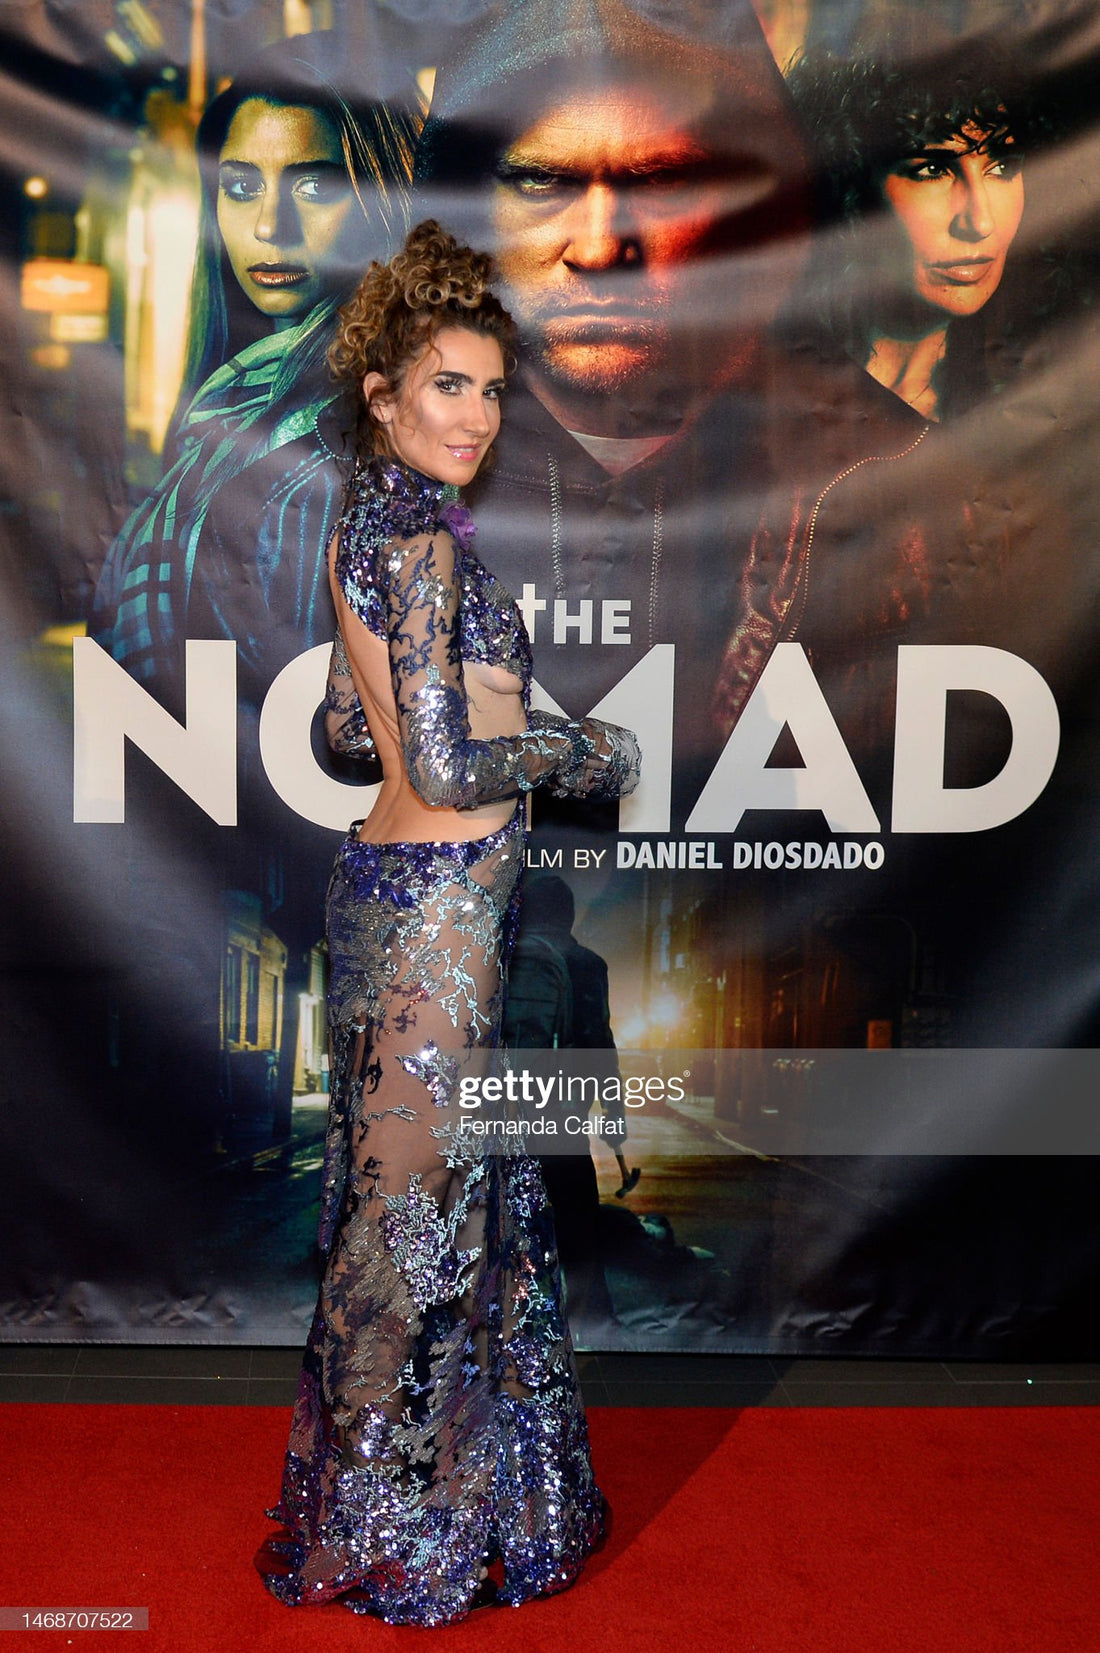 The Premier of The Nomad